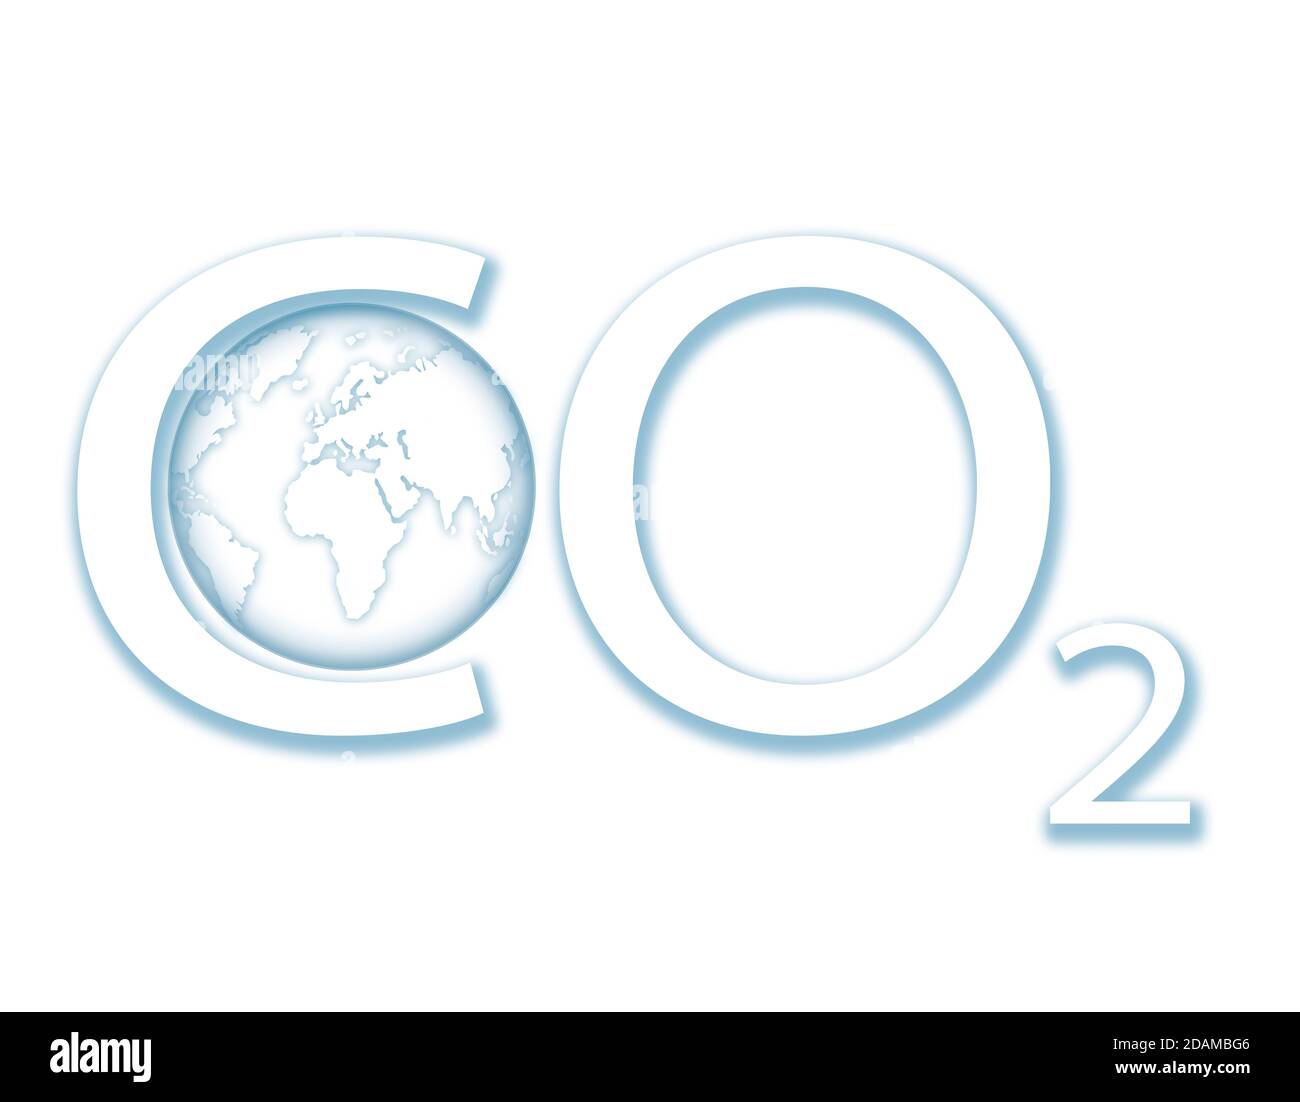 Carbon dioxide with Earth, illustration. Stock Photo